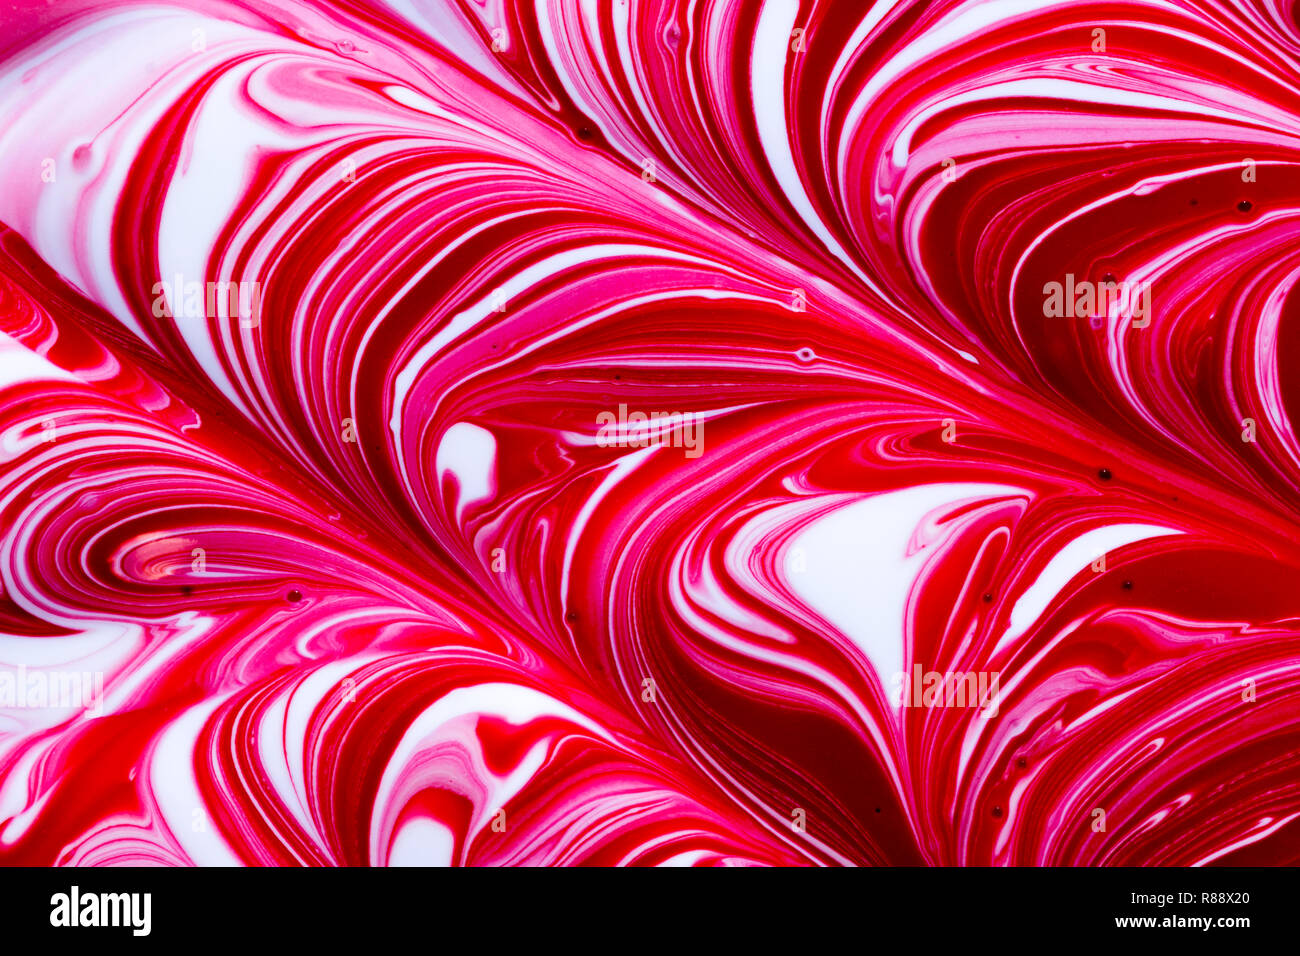 Colourful abstract background of red, white and pink swirl ...